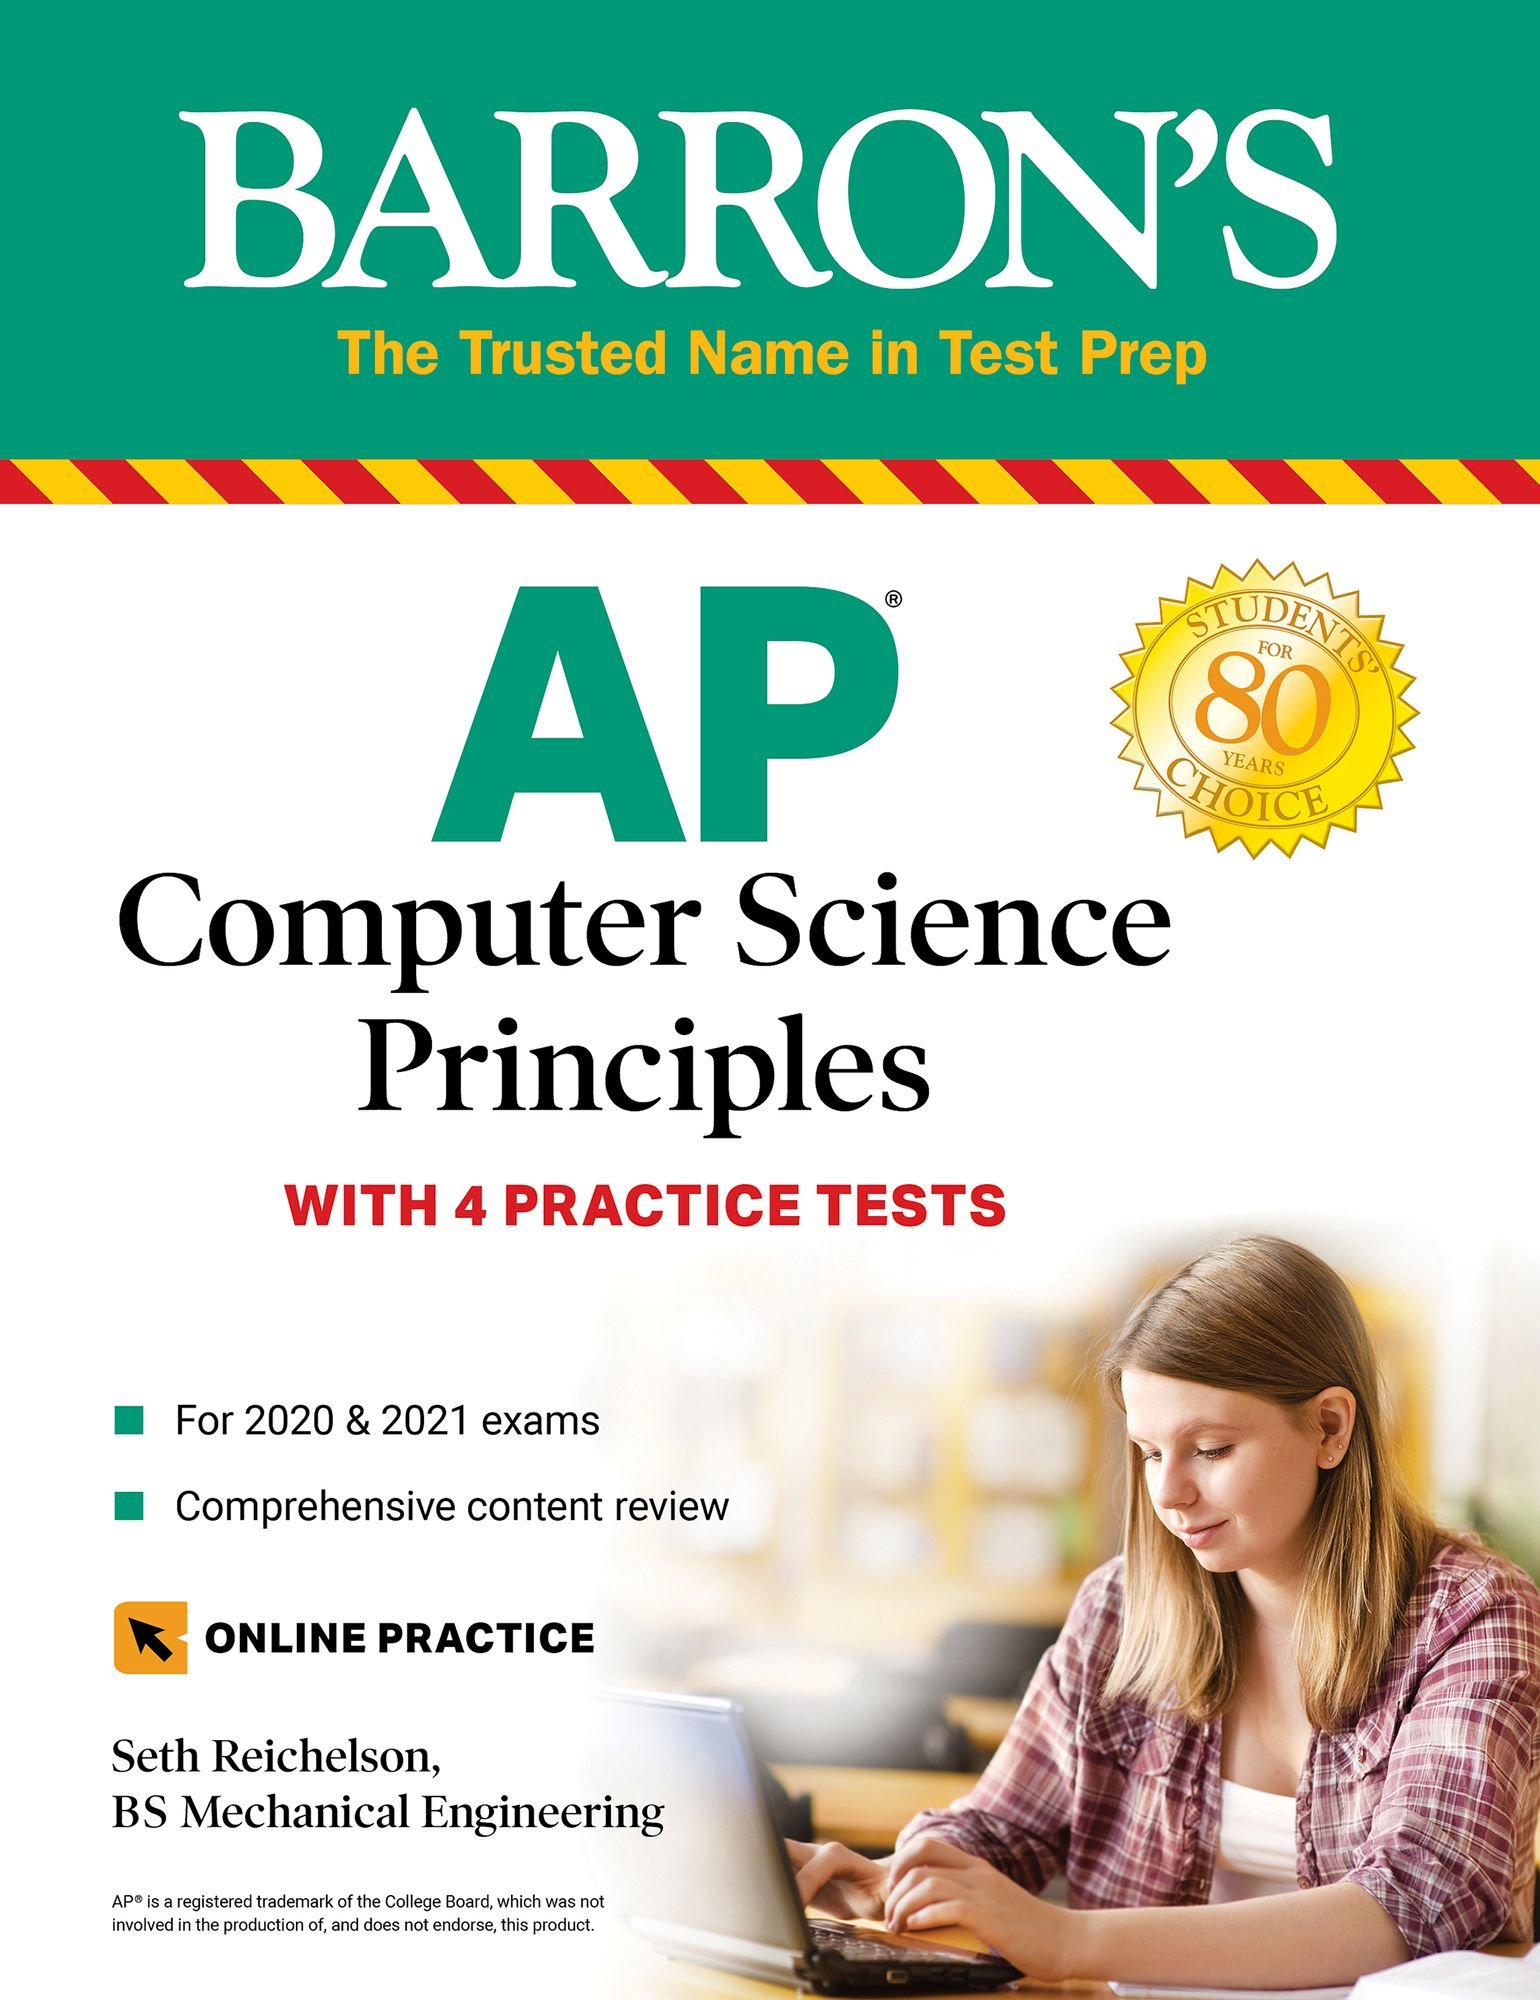 ap-computer-science-principles-with-4-practice-tests-barron-s-test-prep-softarchive